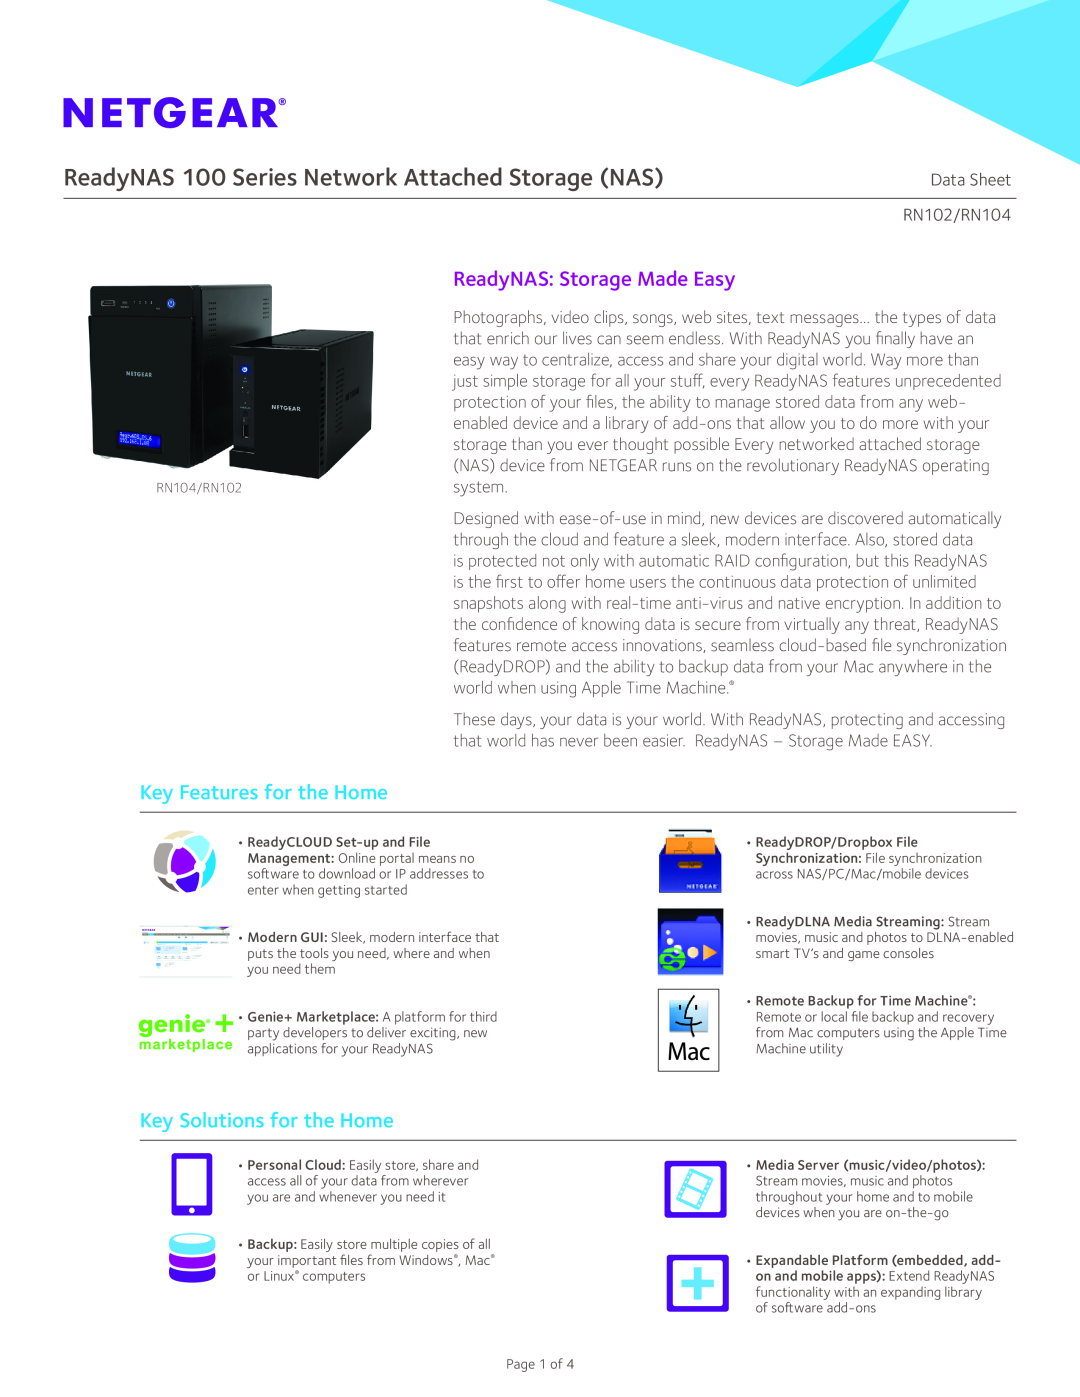 NETGEAR RN10200-100NAS manual ReadyNAS 100 Series Network Attached Storage NAS, Key Features for the Home, Data Sheet 